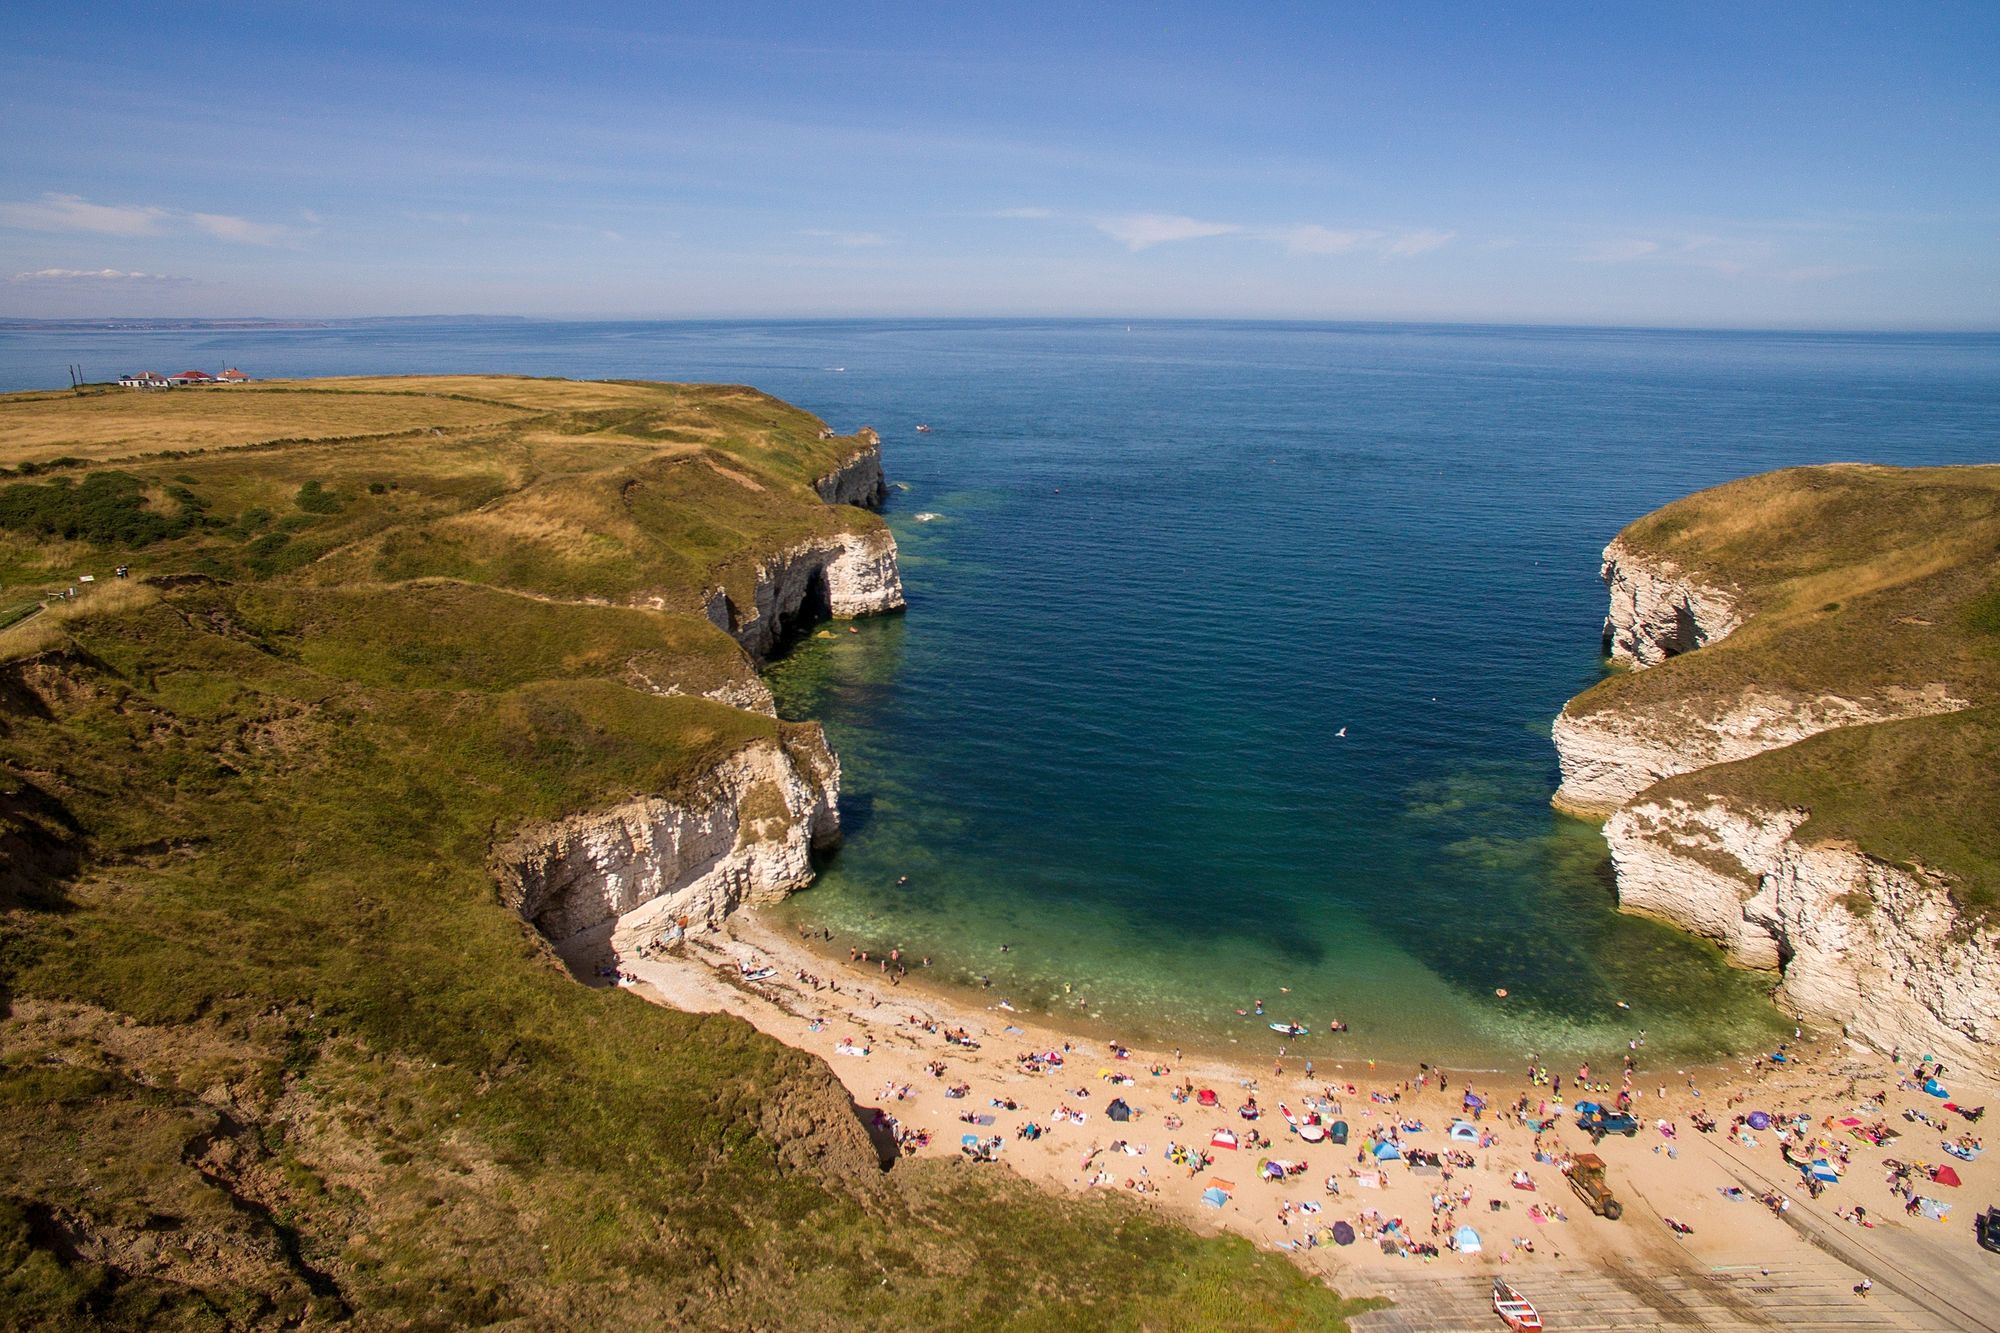 Aerial shot of Flamborough Head and the beach in the bay